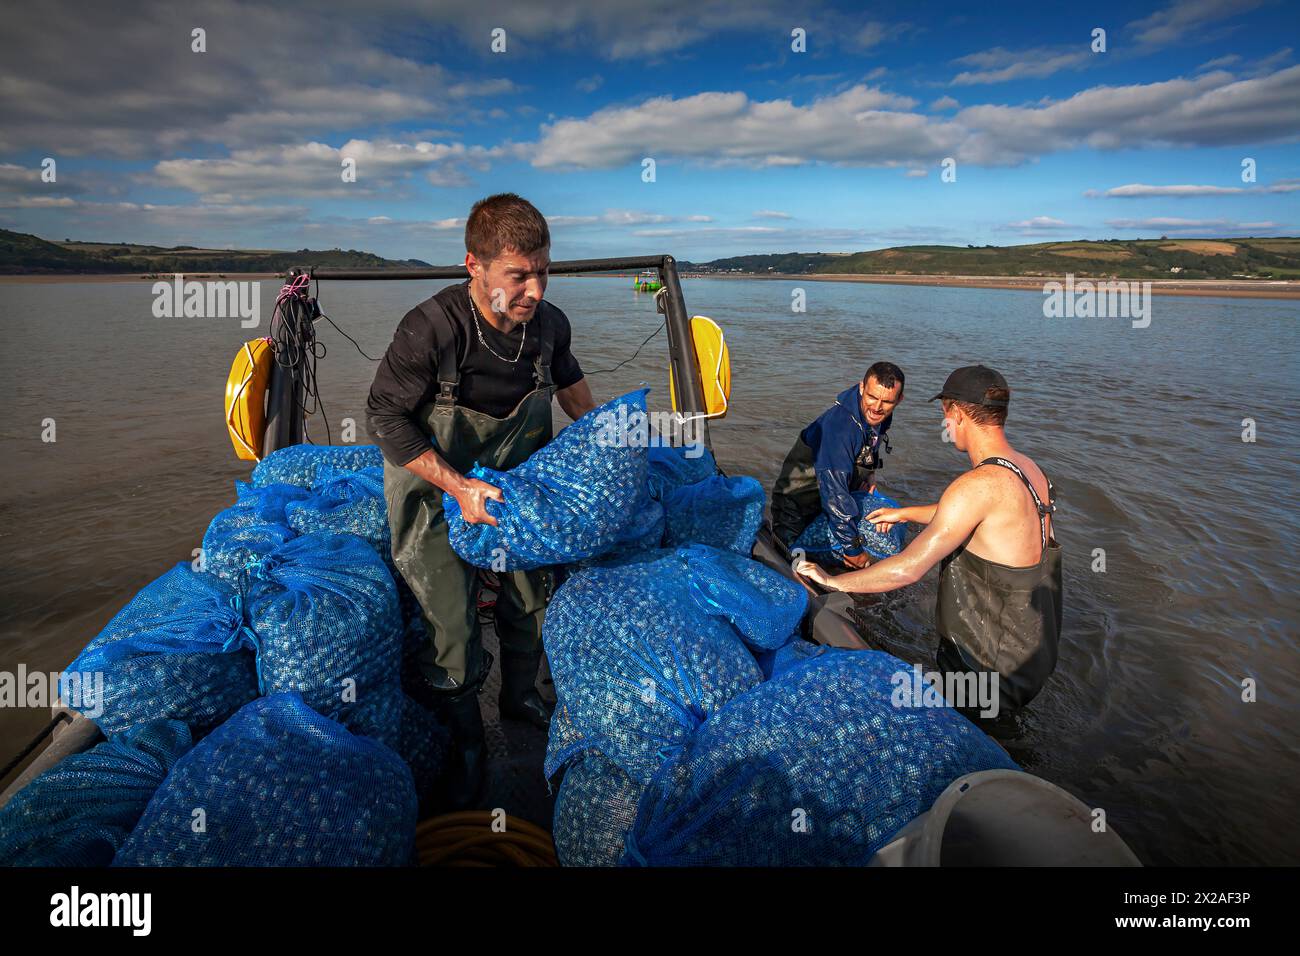 Cockle gatherers loading sacks of cockles onto boat during incoming tide Stock Photo